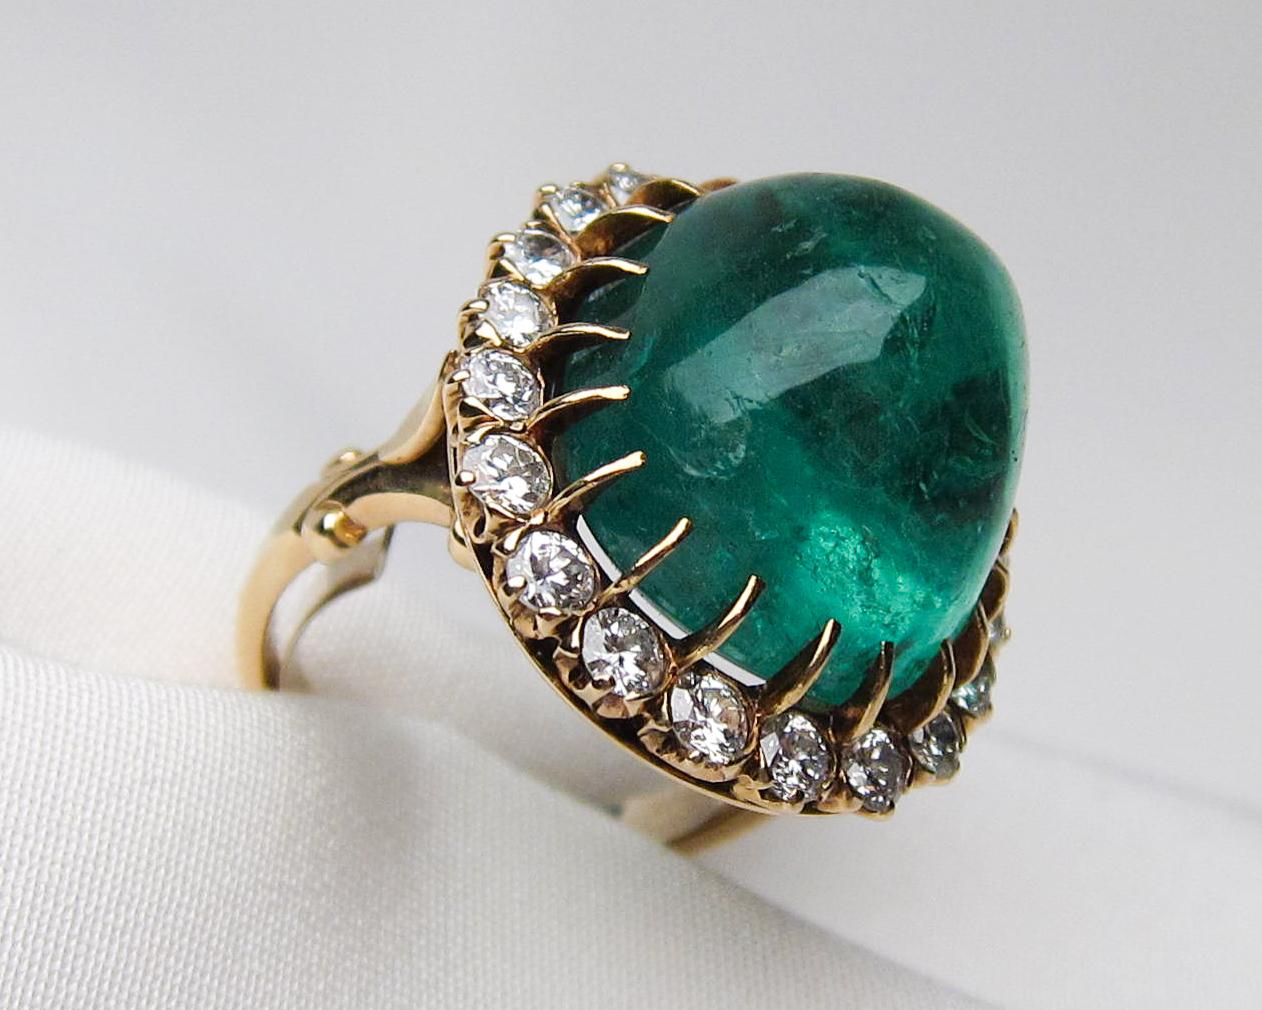 Circa 1940. This fabulous Retro Era ring features a dazzling 27.60 carat cabochon-cut natural emerald, surrounded by twenty prong-set round brilliant-cut diamonds, set in 14KT yellow gold. The diamonds weigh 1.60 carats with an SI1-SI2 clarity and